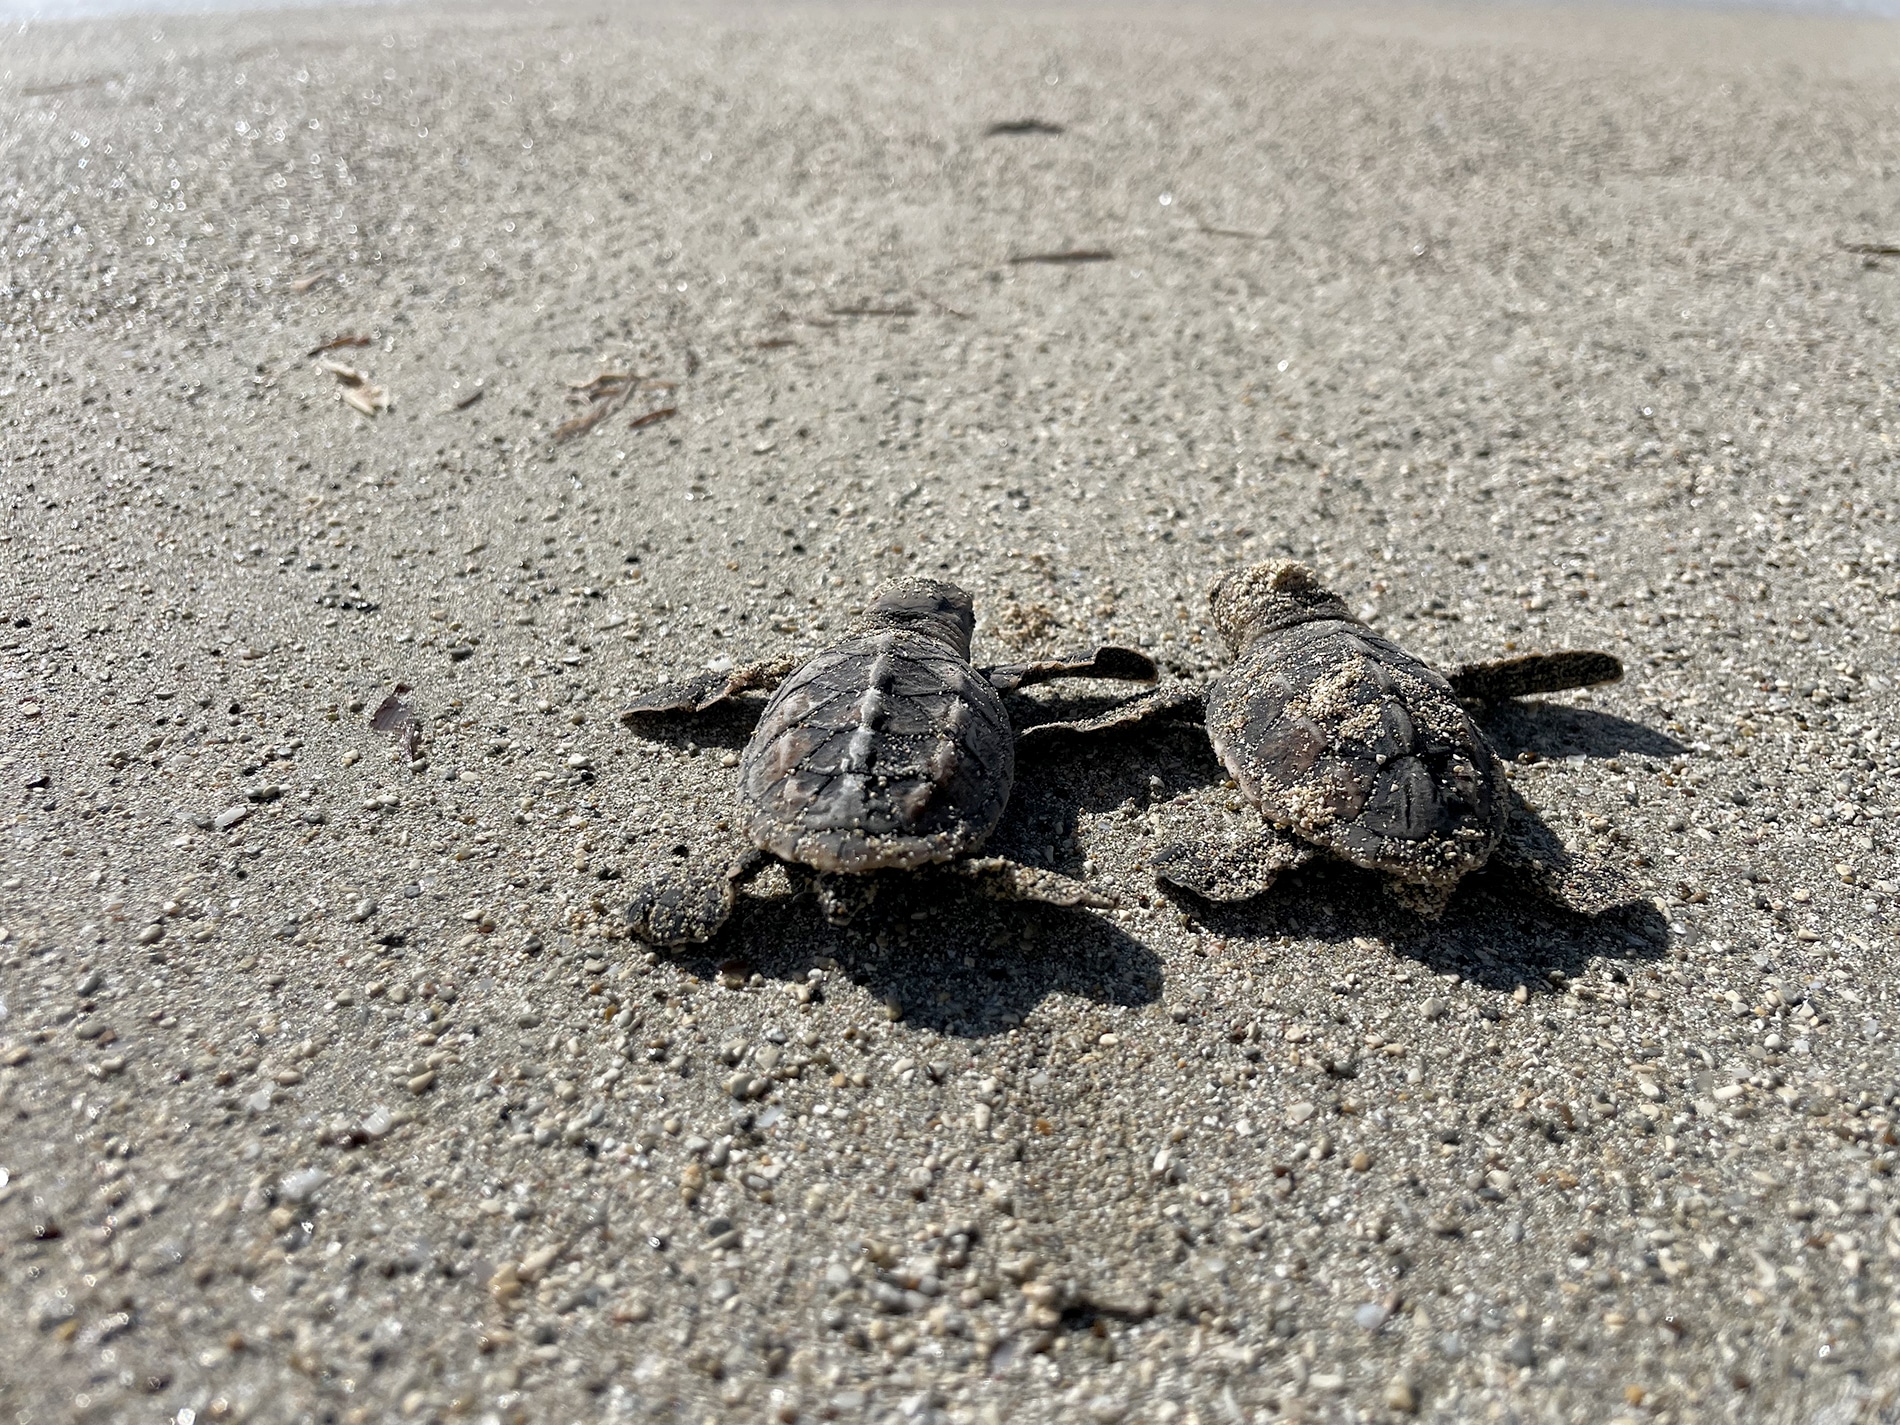 two hawksbill hatchlings in the sand